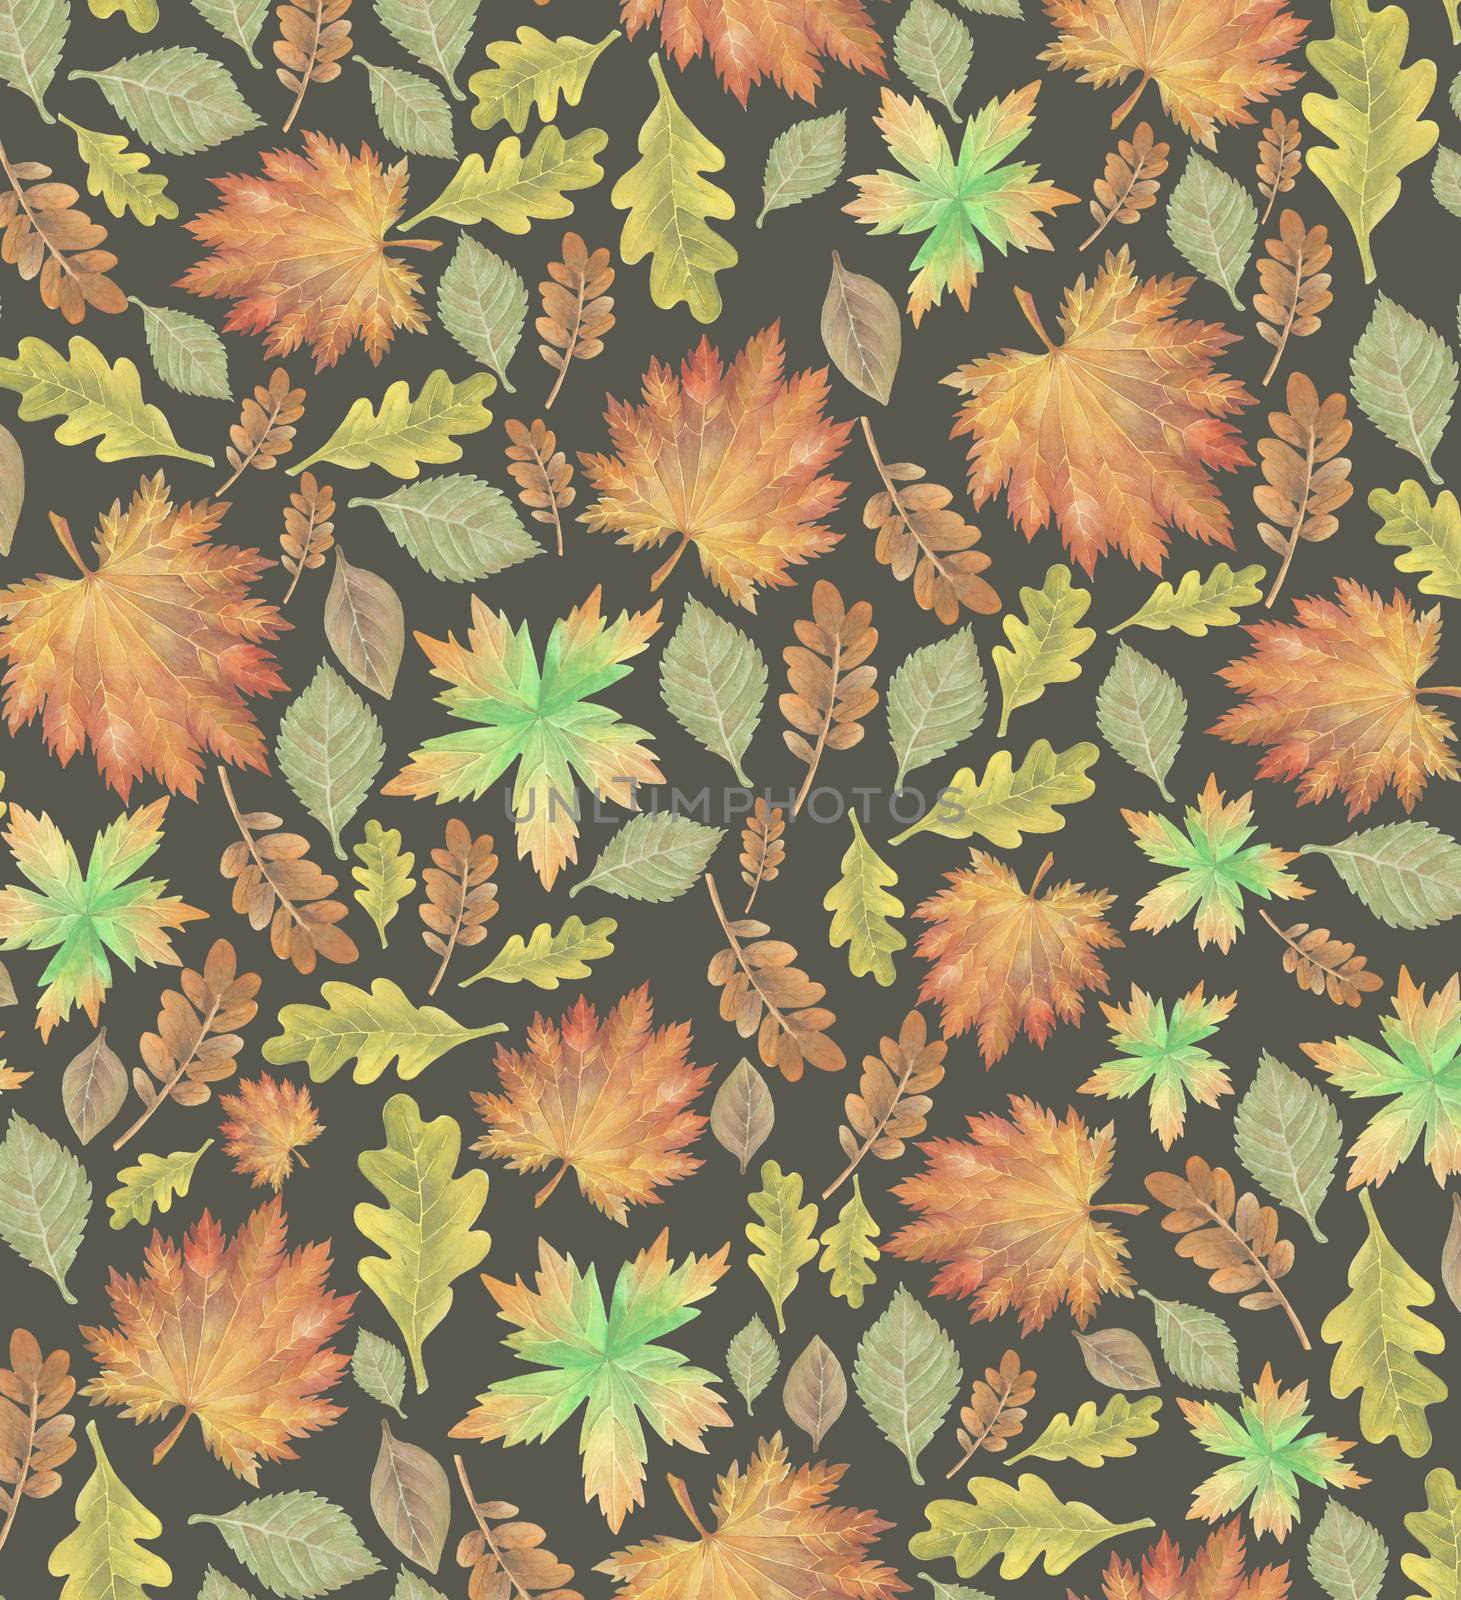 Seamless pattern with different autumn leaves, hand-drawn watercolor painting